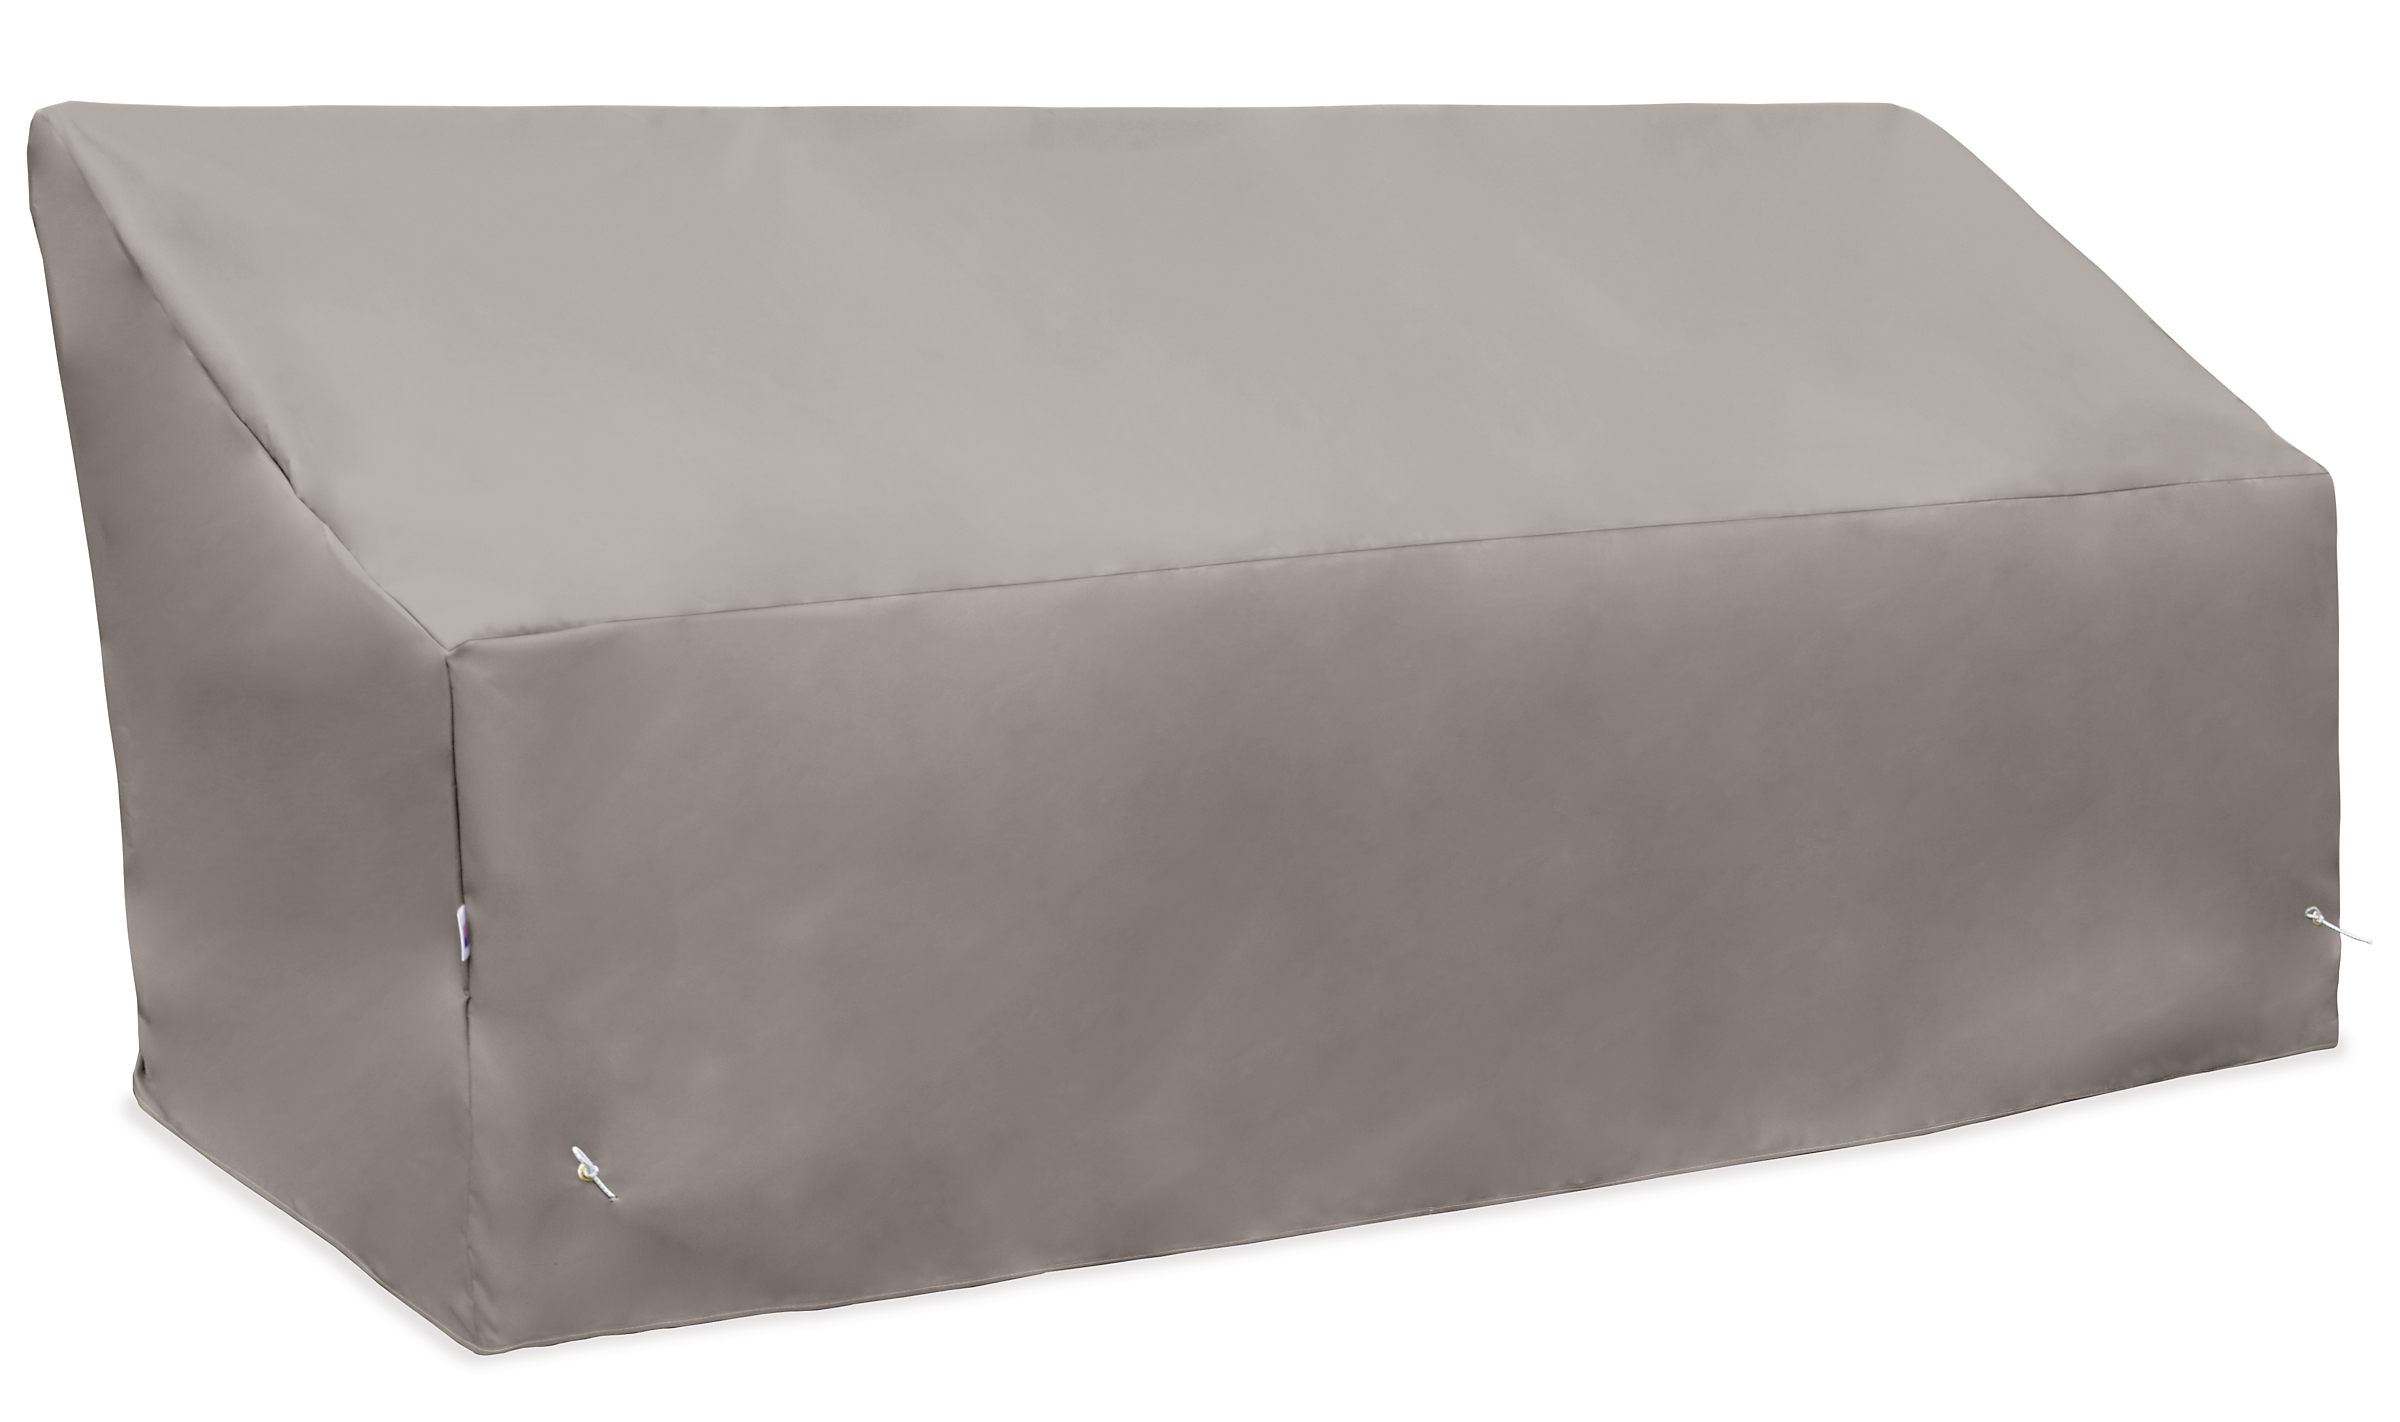 Outdoor Cover for Sofa 101w 38d 27h with Hooks